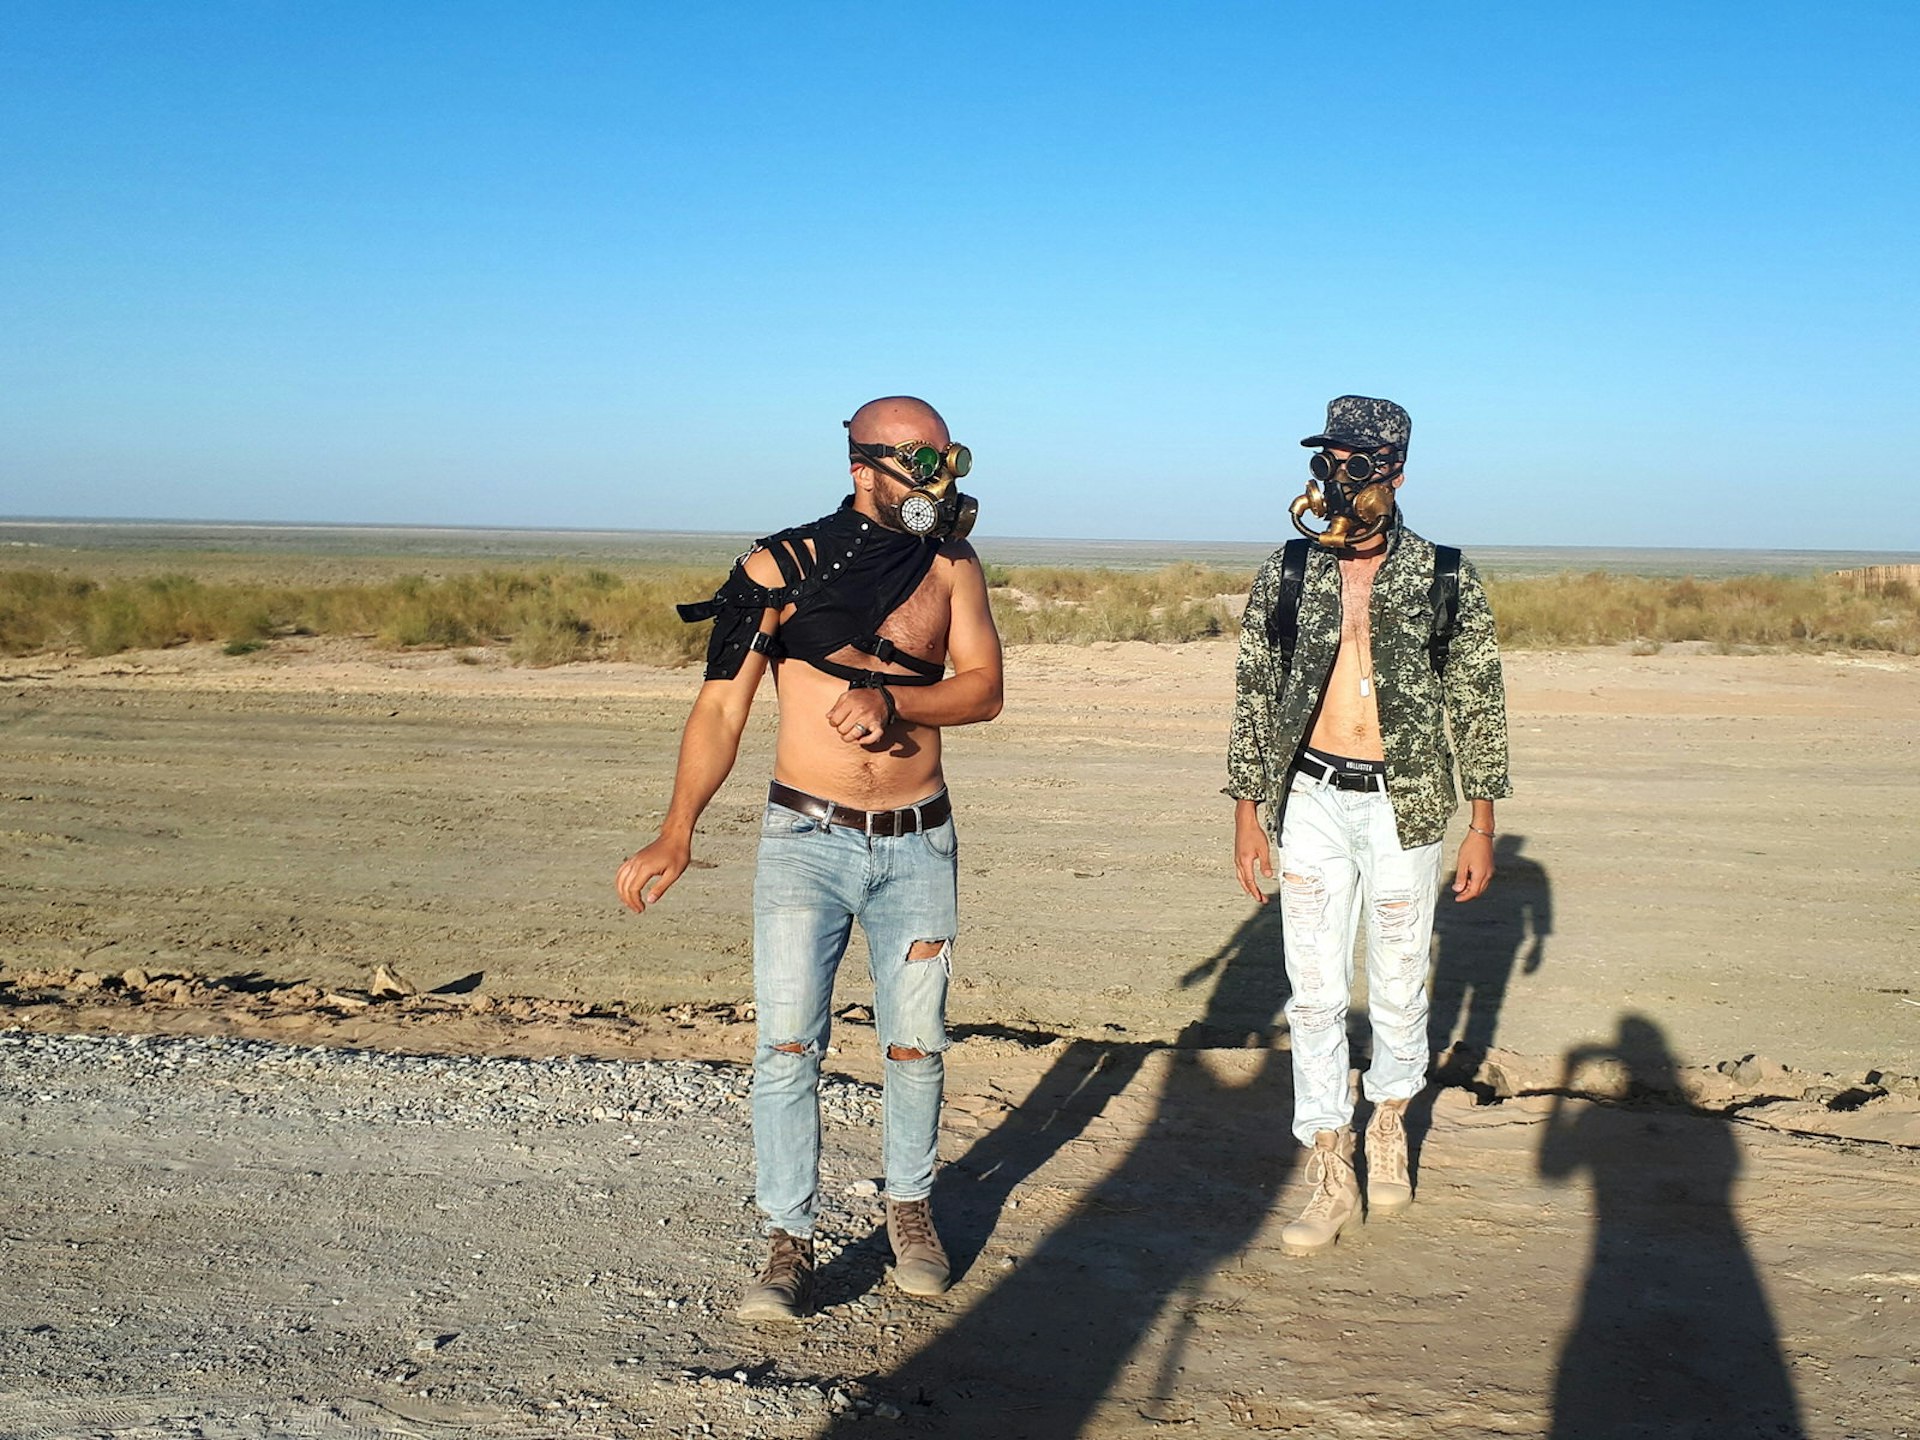 Two men in gas masks and ragged, torn clothing, in the desert